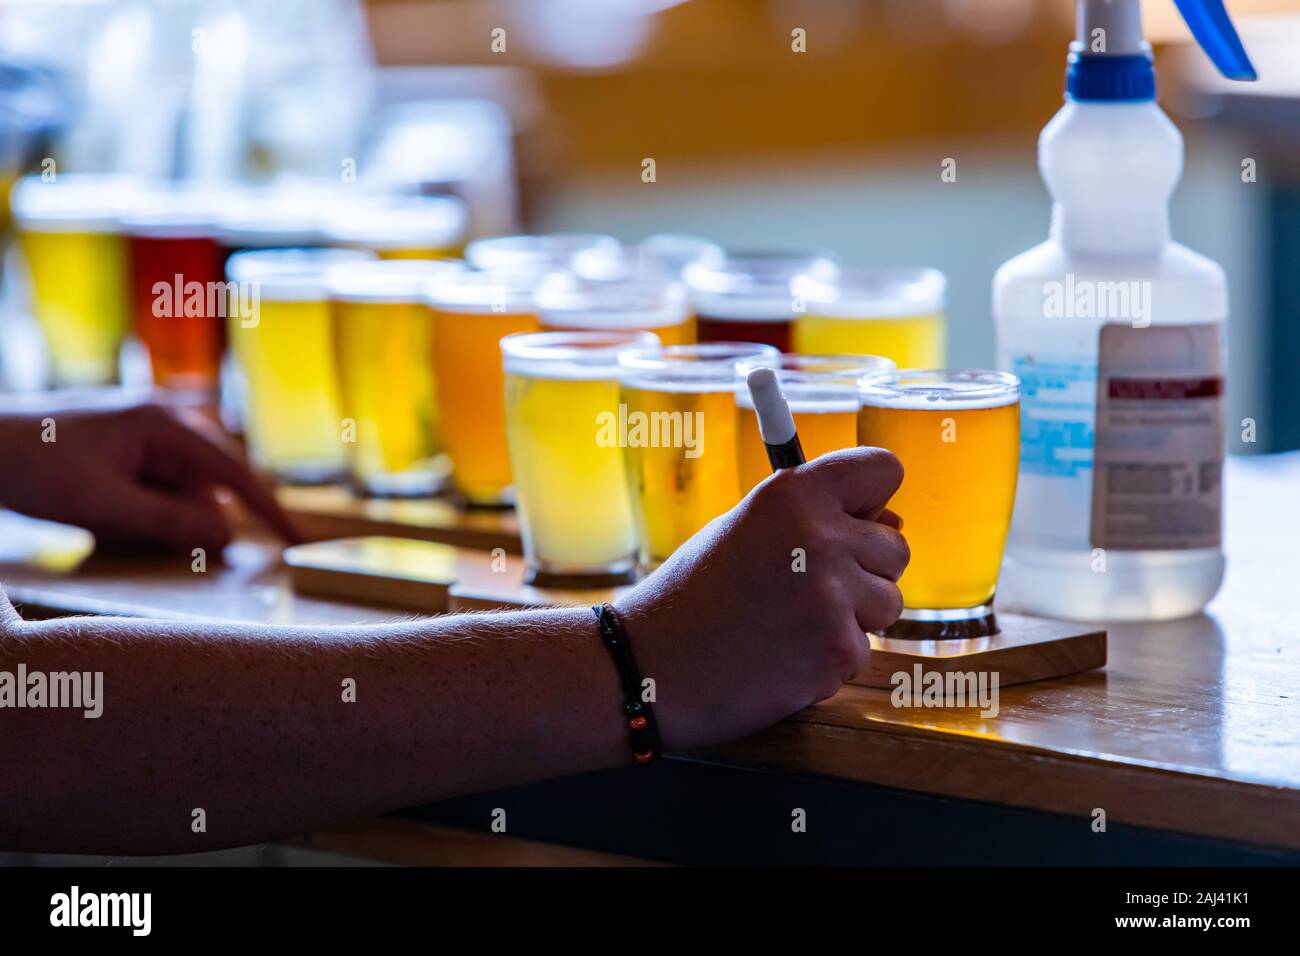 man hand holding a pen next flight of Craft four of different Beers glasses on Wooden Trays and chemical bottle close up, beer tasting room background Stock Photo